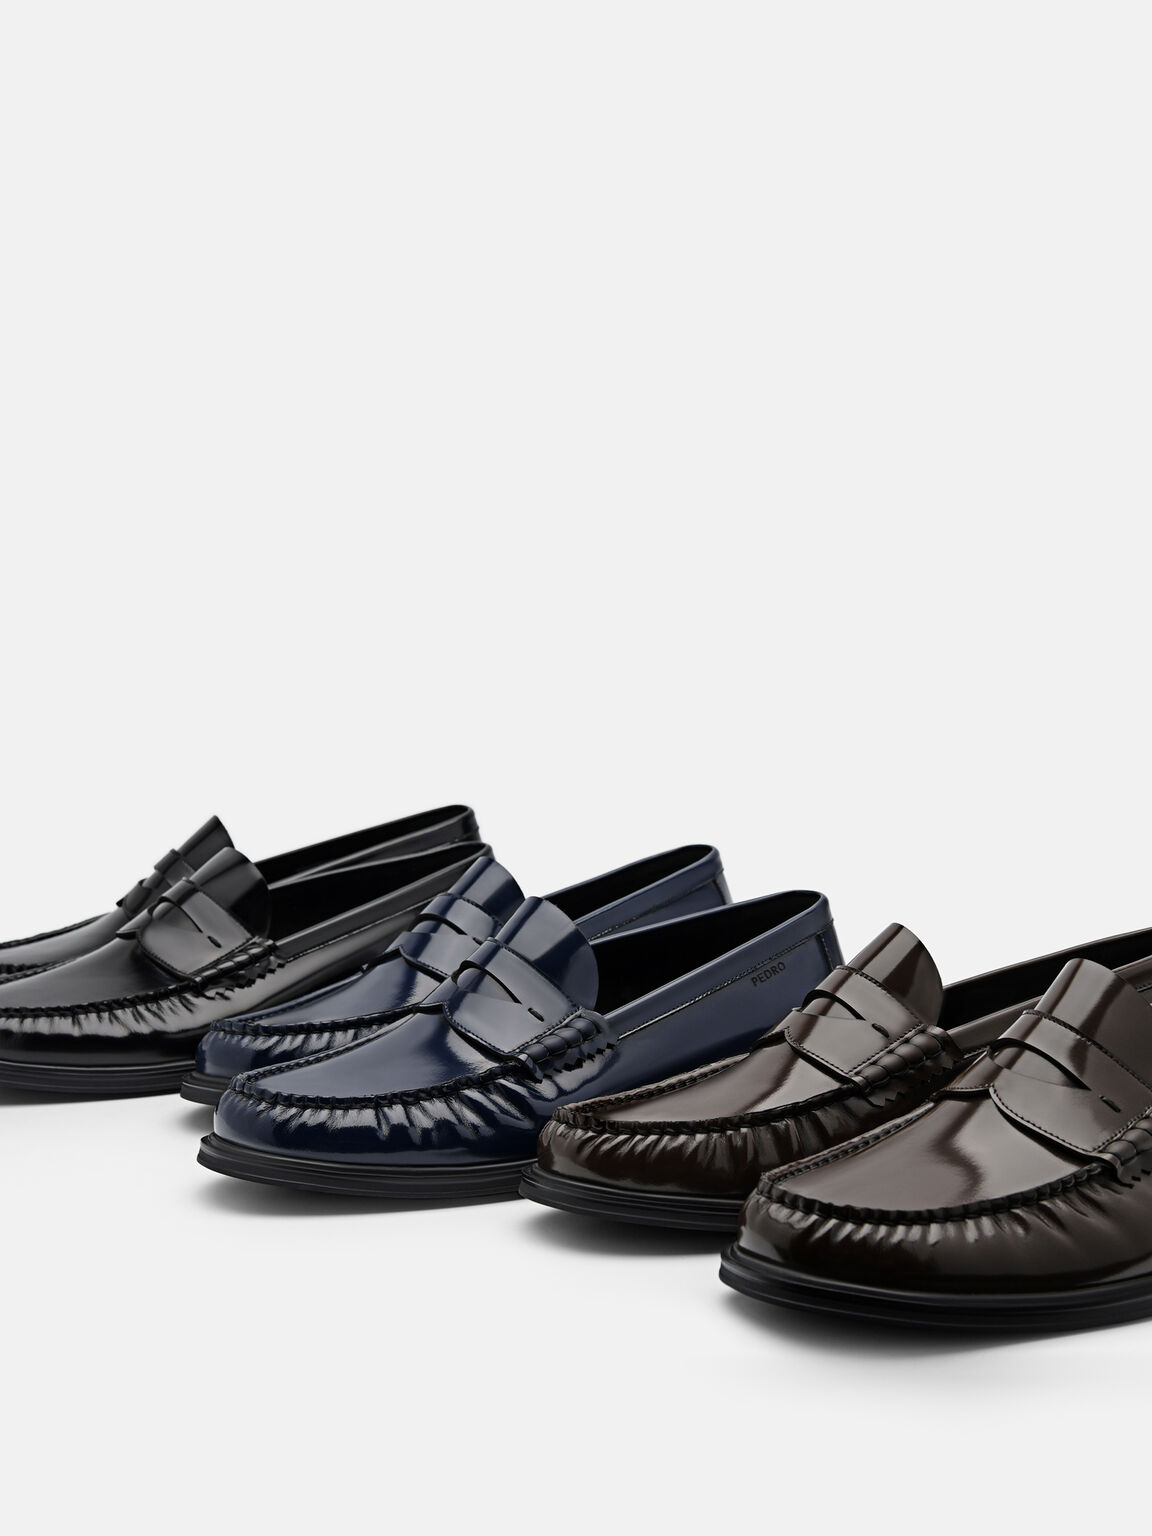 Black Leather Penny Loafers - PEDRO AE